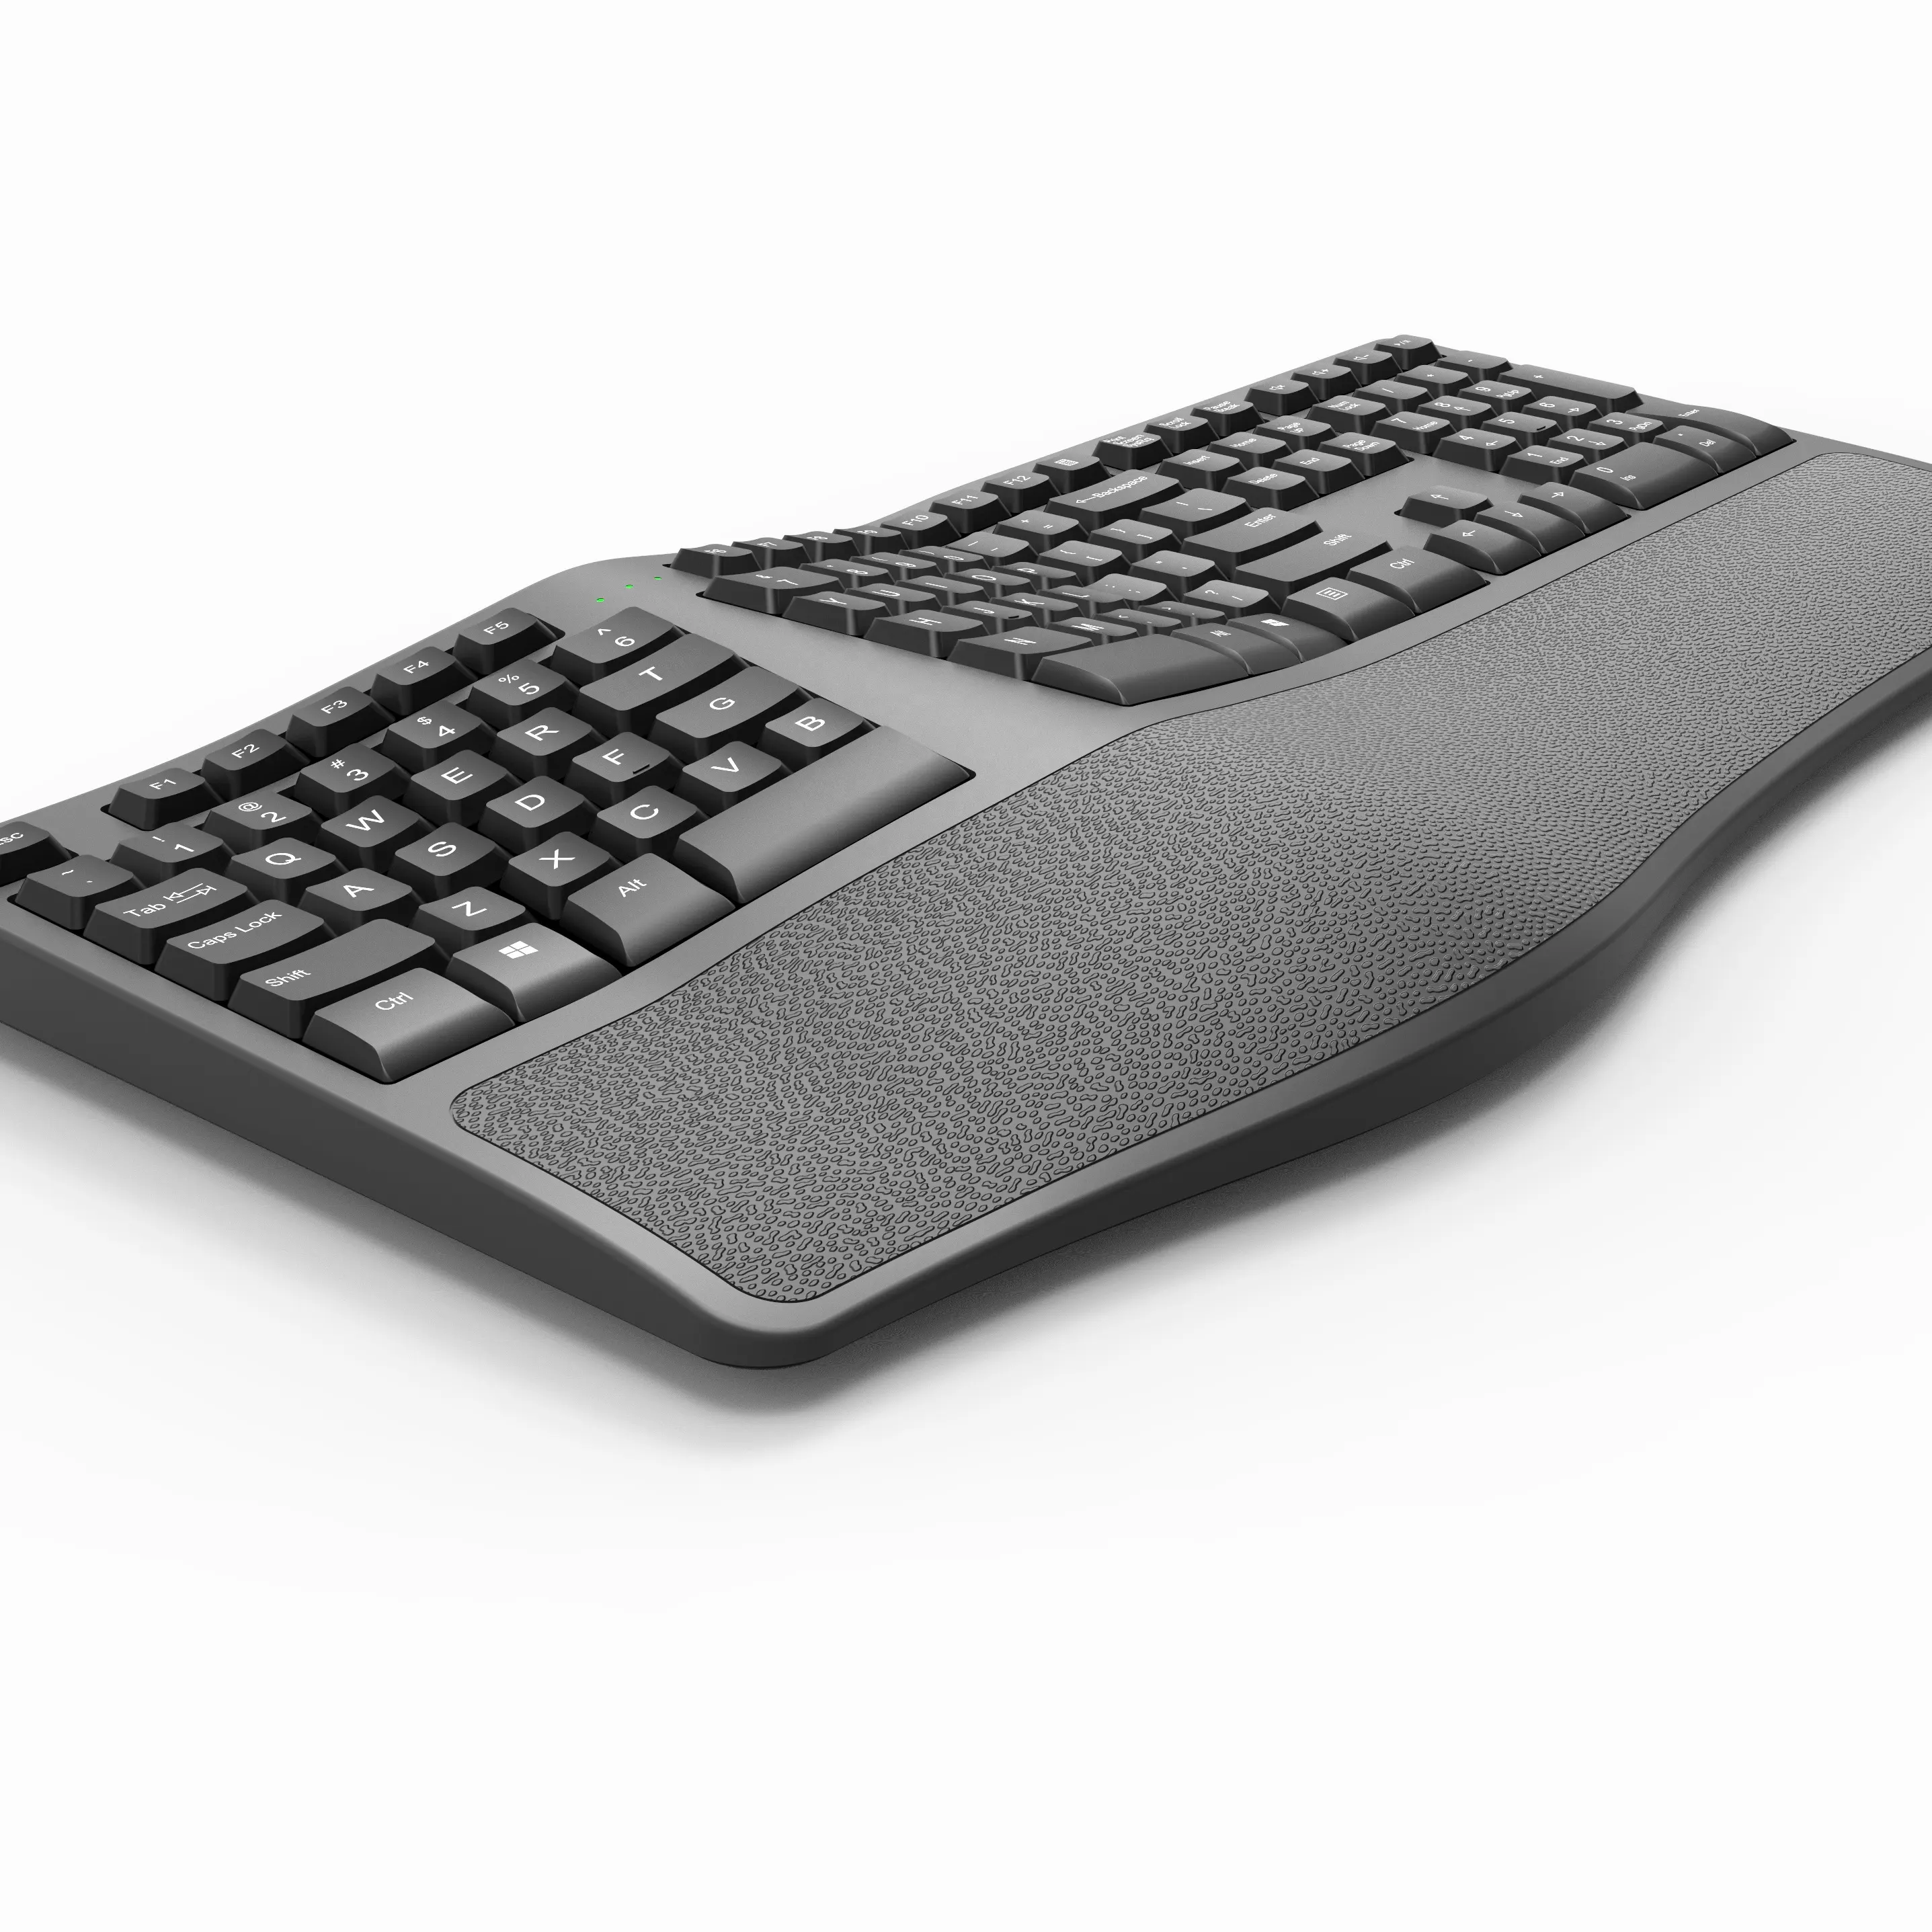 True high performance Ergonomic Keyboard Wireless Rechargeable 2.4G Ergonomic Keyboards with Wrist Rest Cushion for Chrome/PC